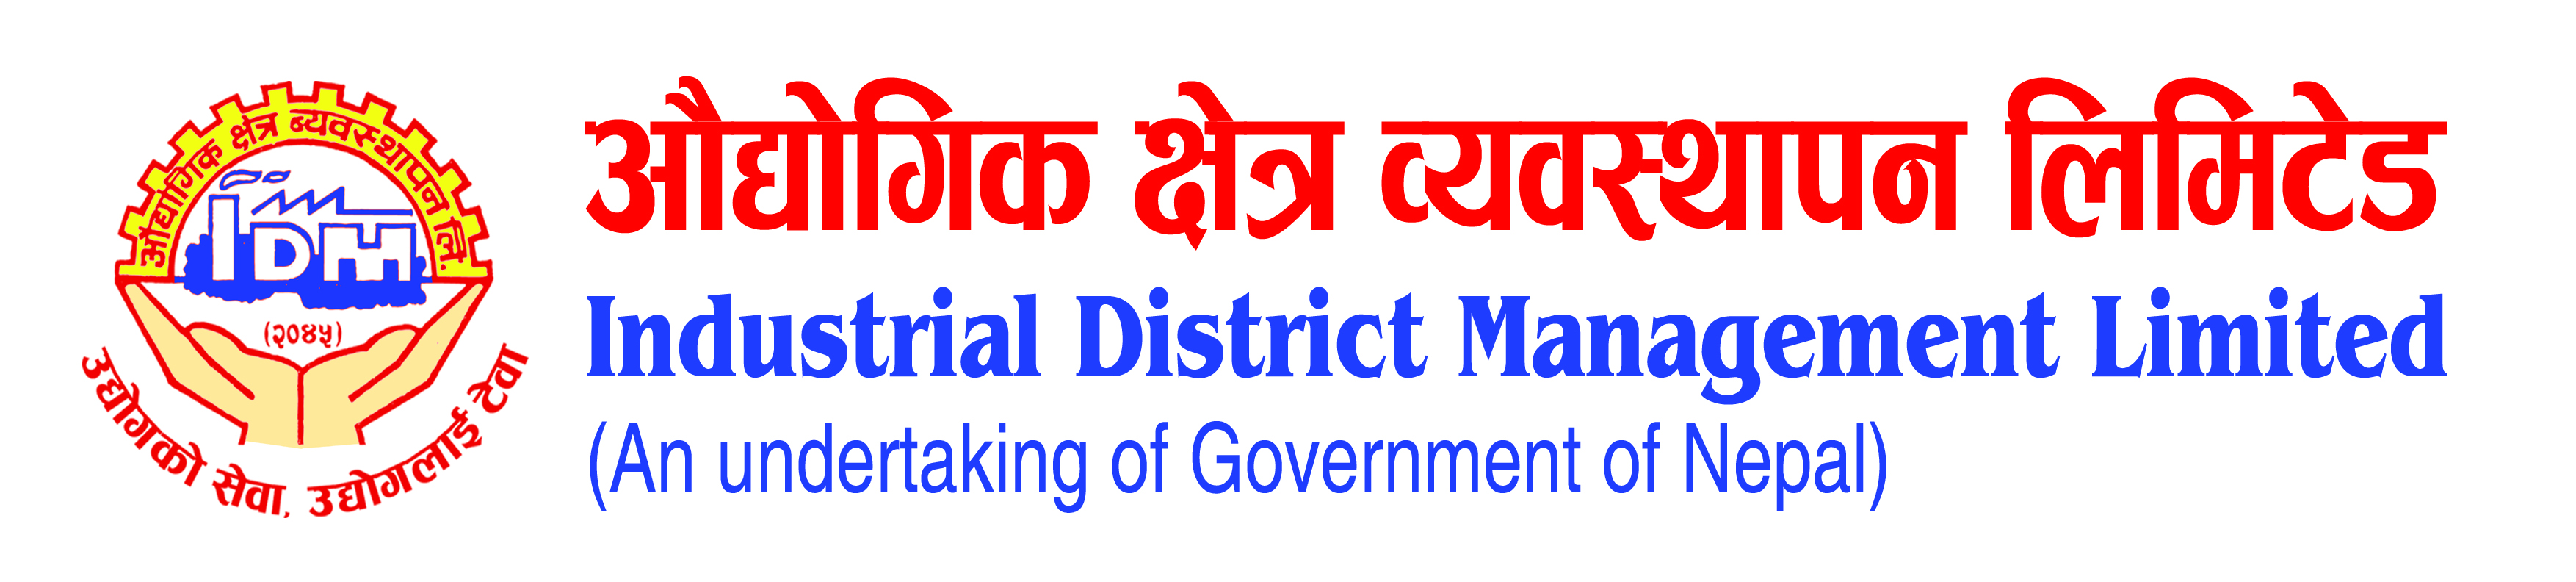 Industrial District Management Limited